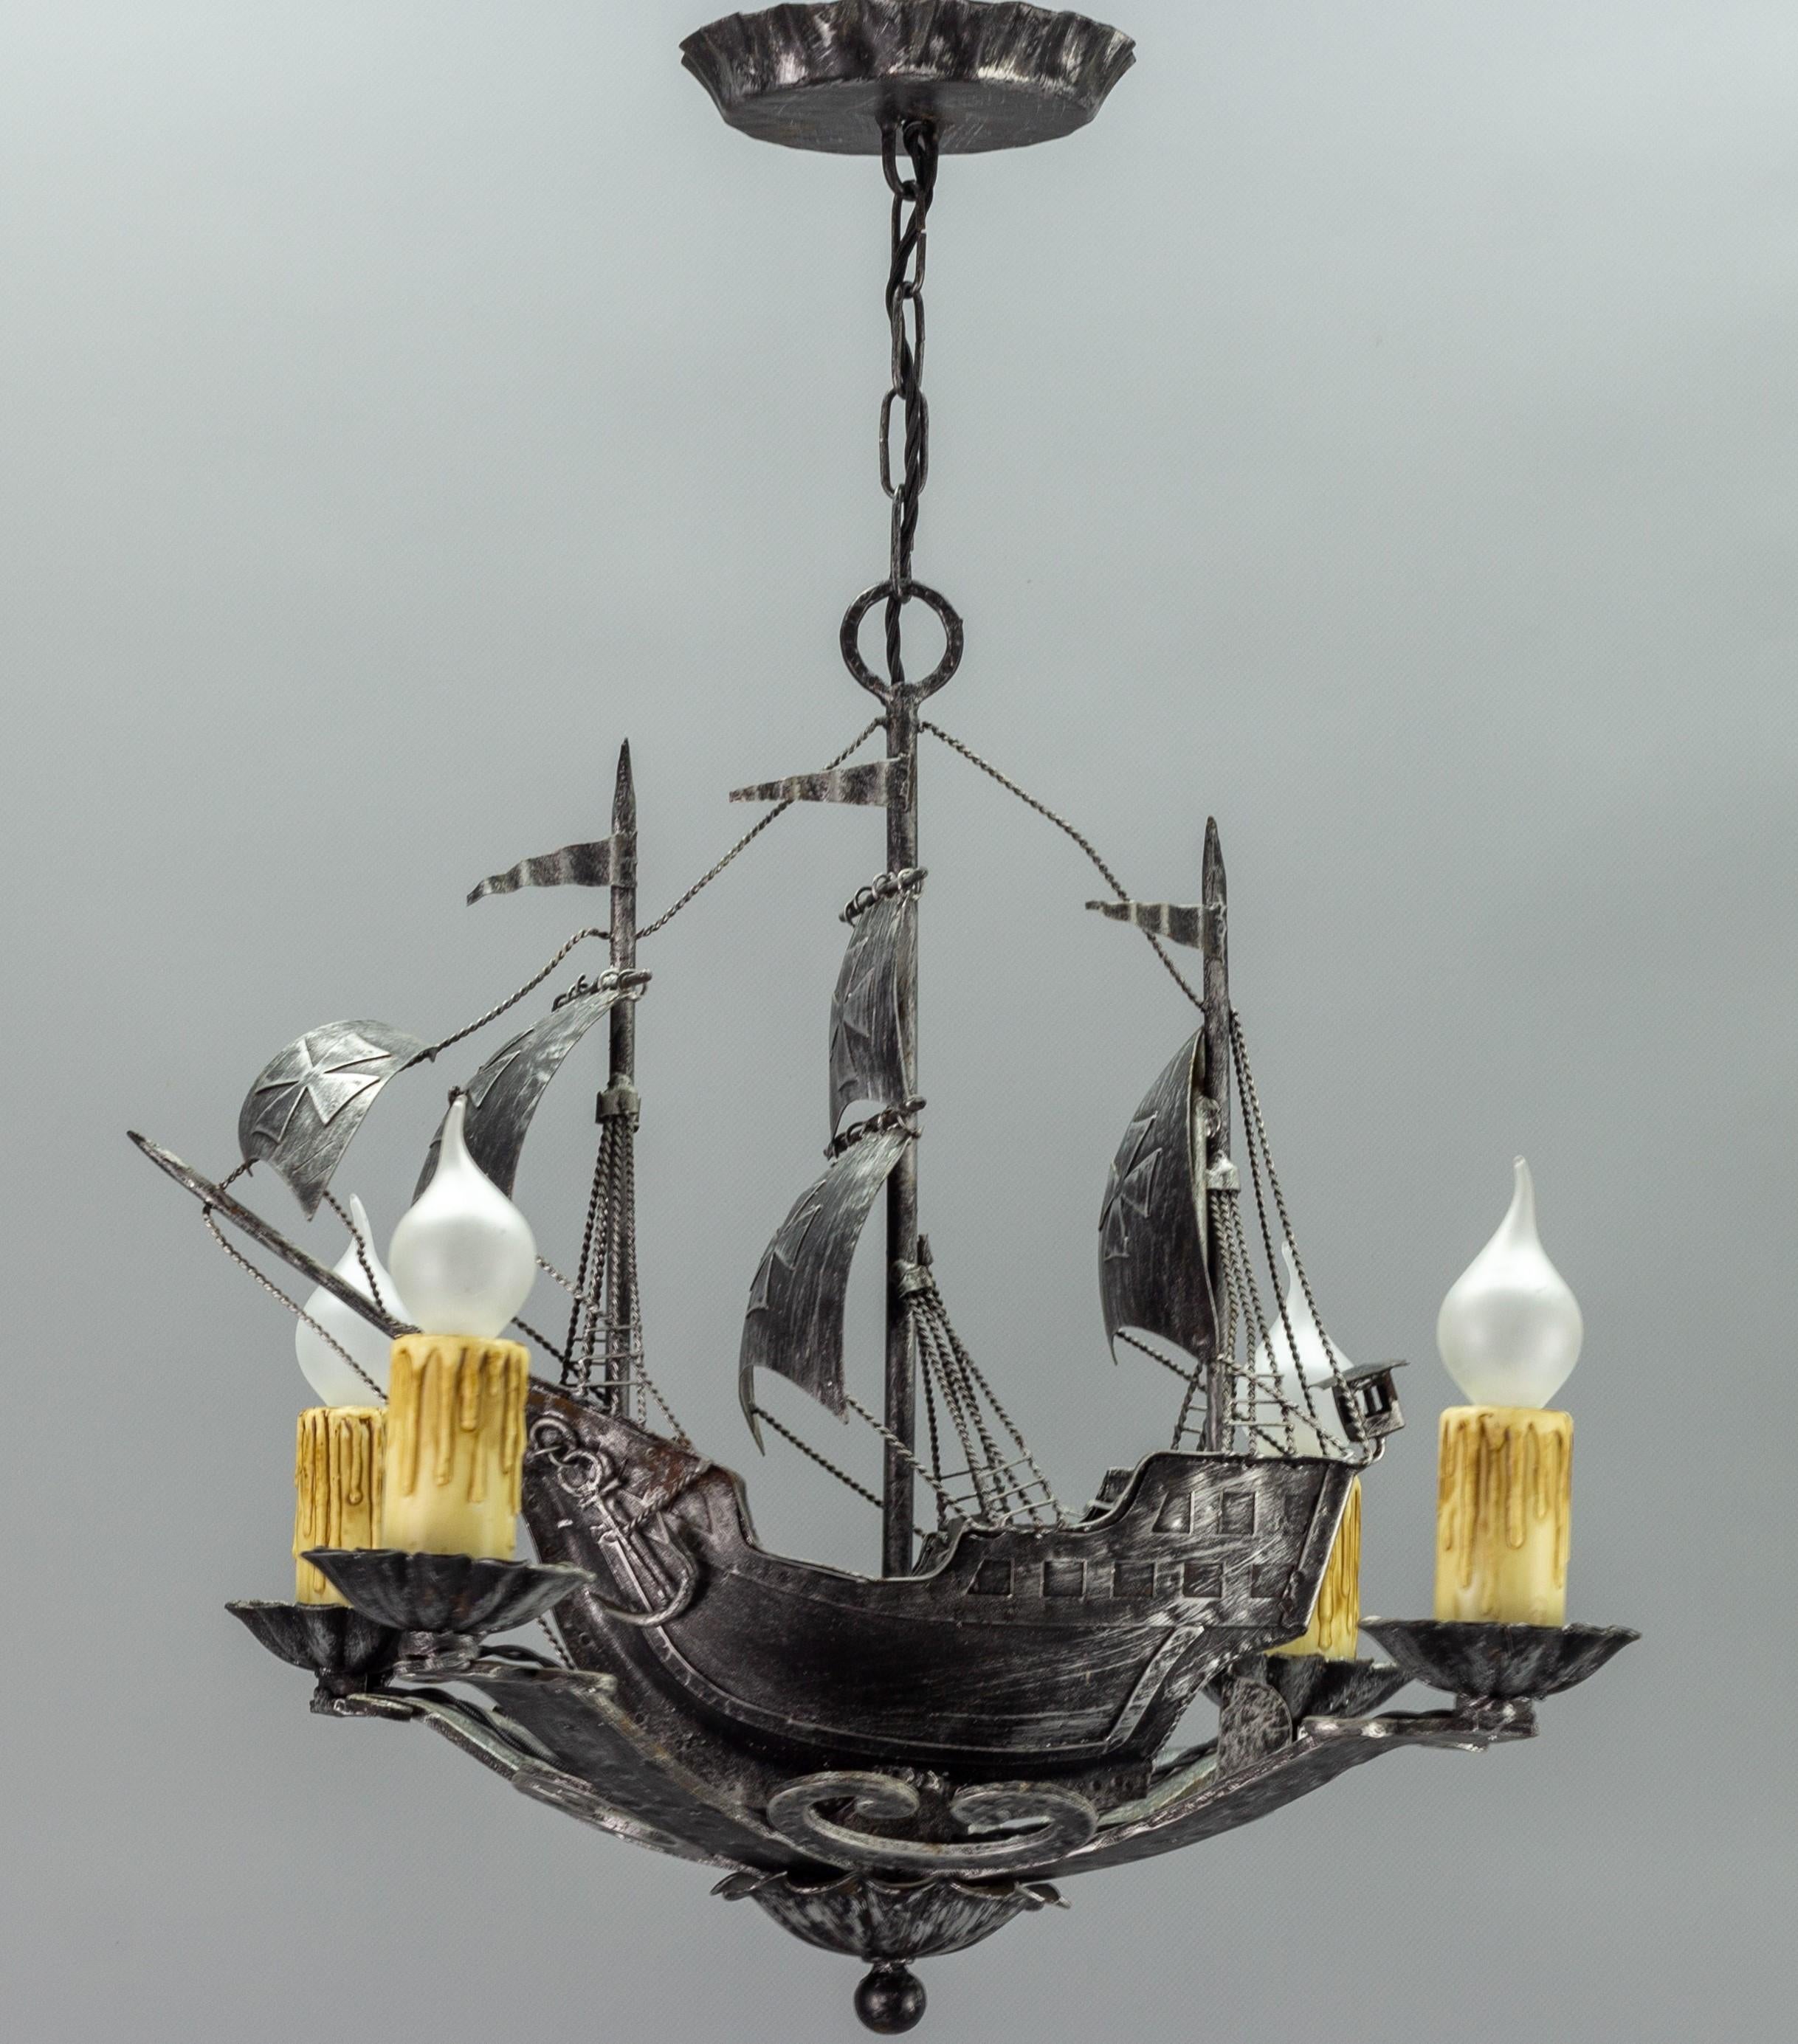 Impressive silver color wrought iron four-light chandelier represents a beautiful Spanish galleon with three masts and sailing ship details such as sails, ropes, anchor, flags, and lantern. 
This outstanding chandelier is a real eye-catcher and